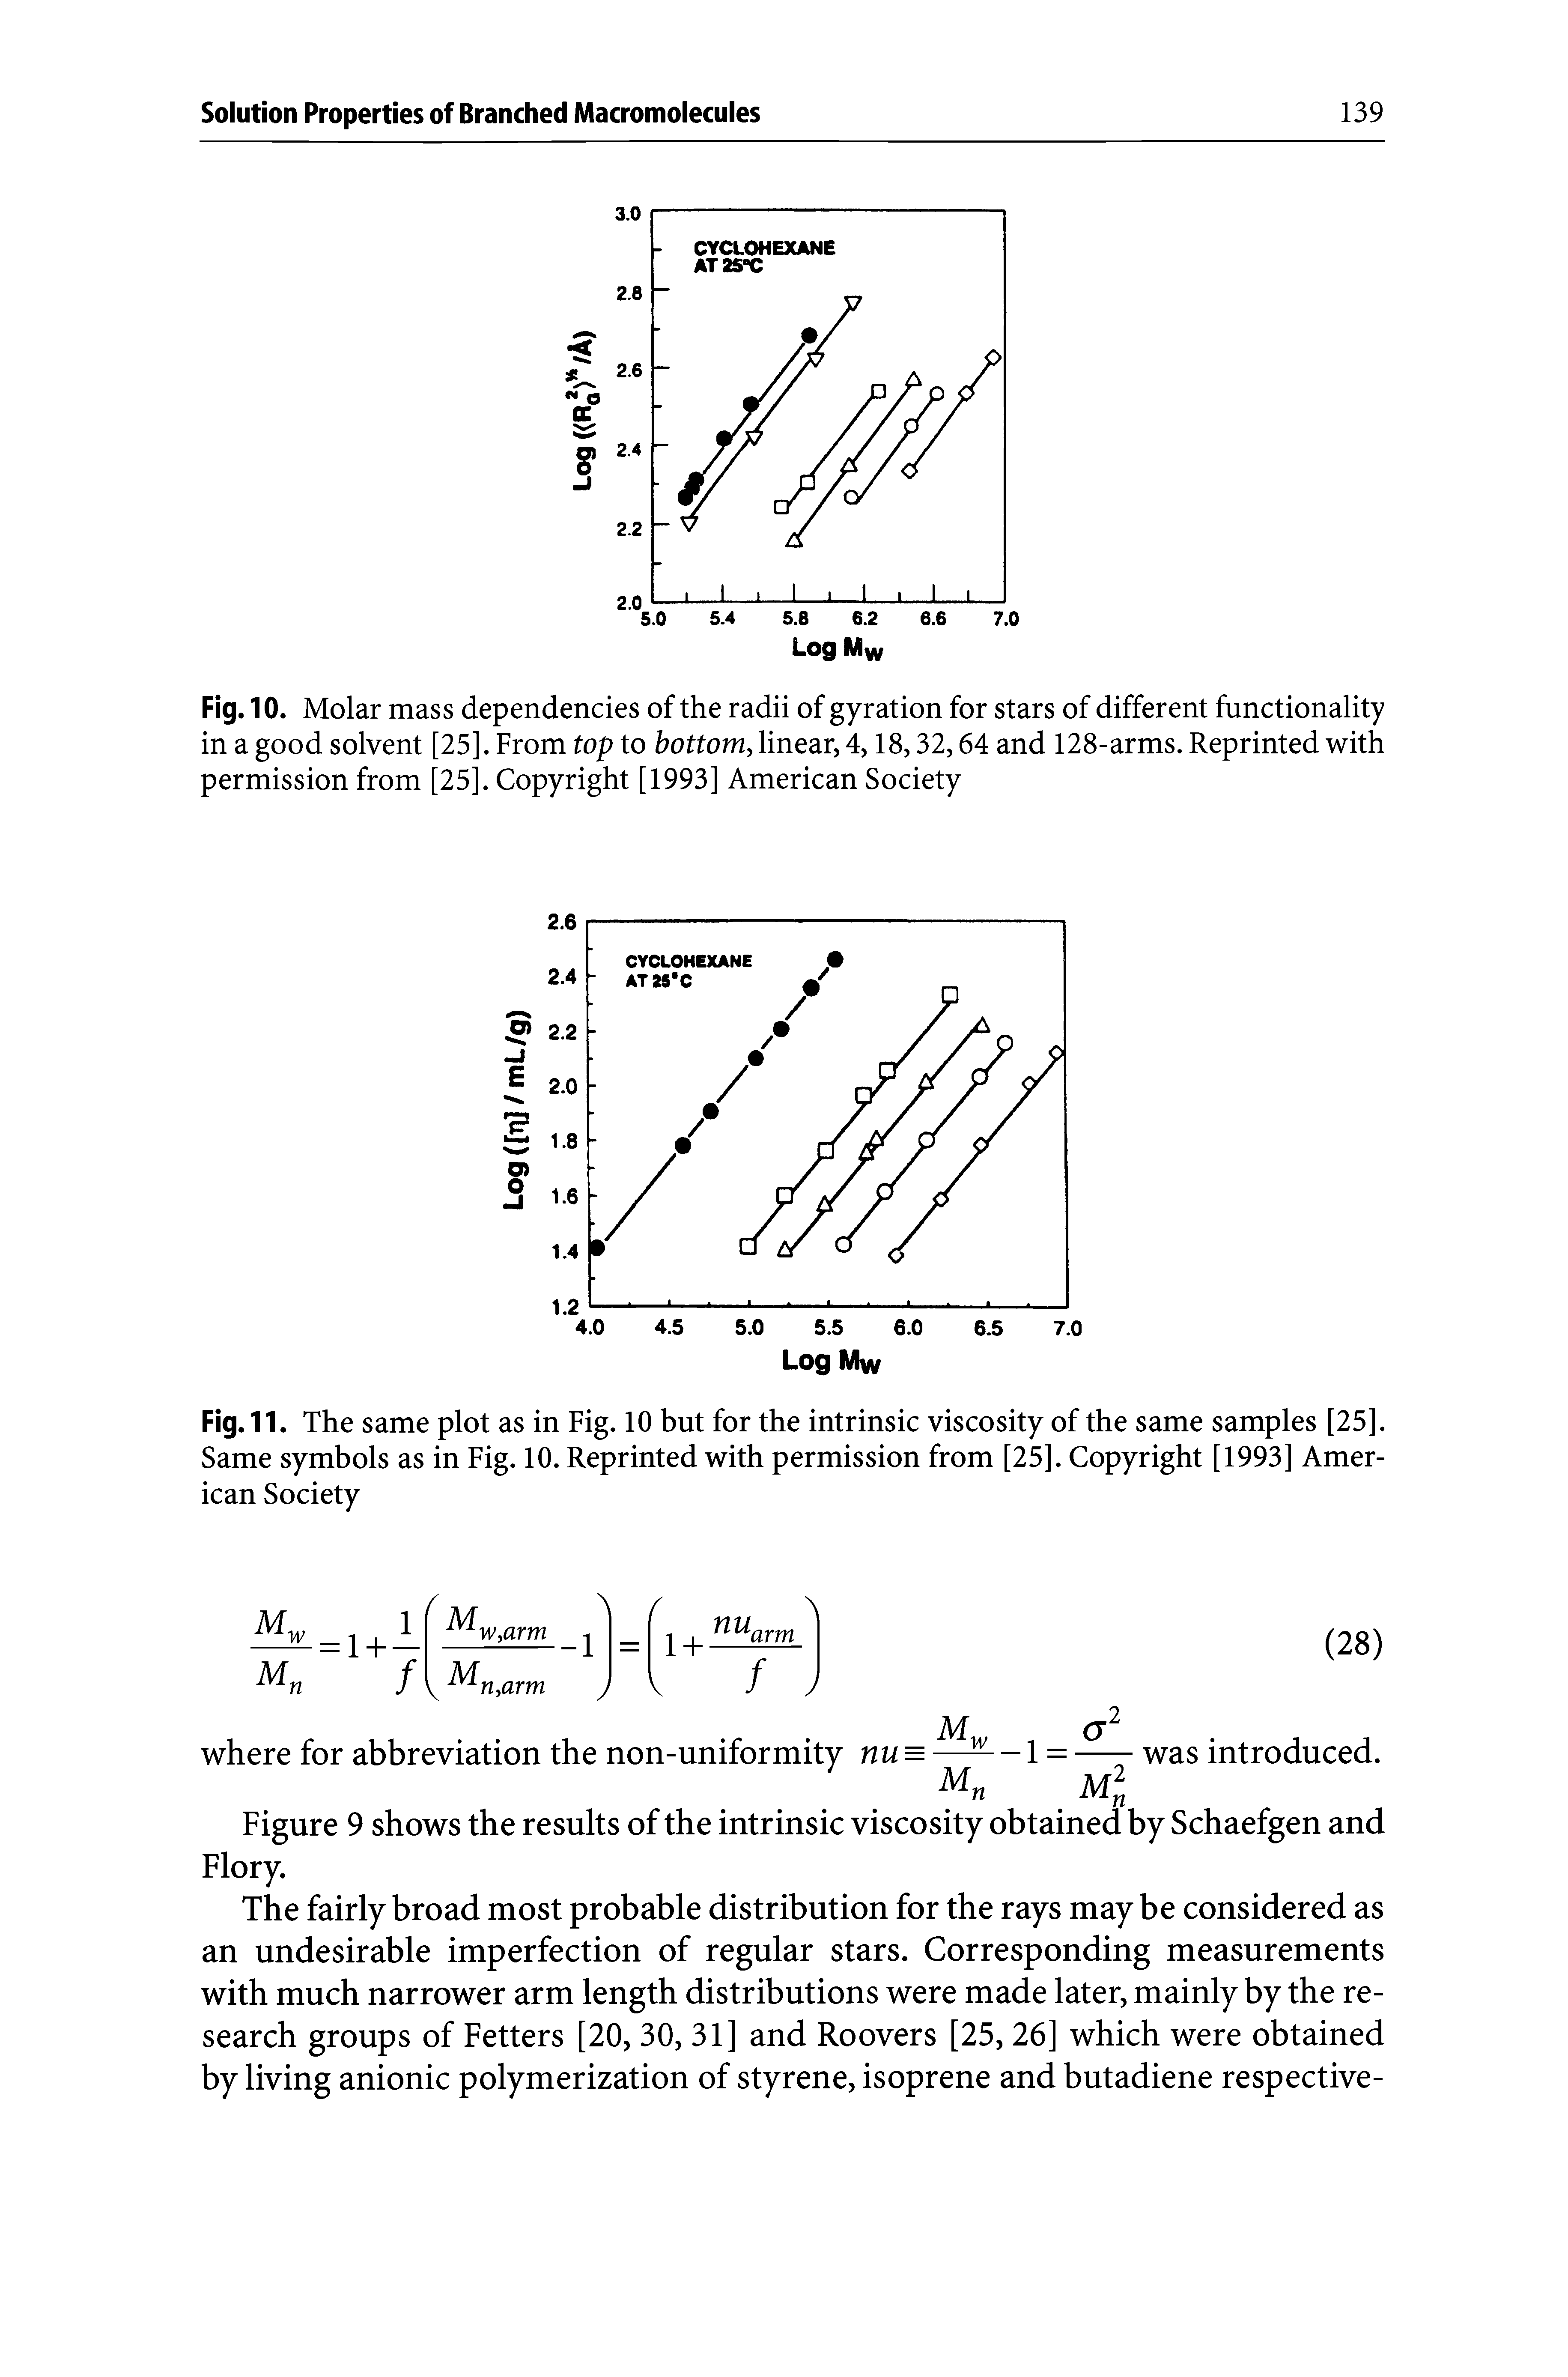 Fig. 10. Molar mass dependencies of the radii of gyration for stars of different functionality in a good solvent [25]. From top to bottom, linear, 4,18,32,64 and 128-arms. Reprinted with permission from [25]. Copyright [1993] American Society...